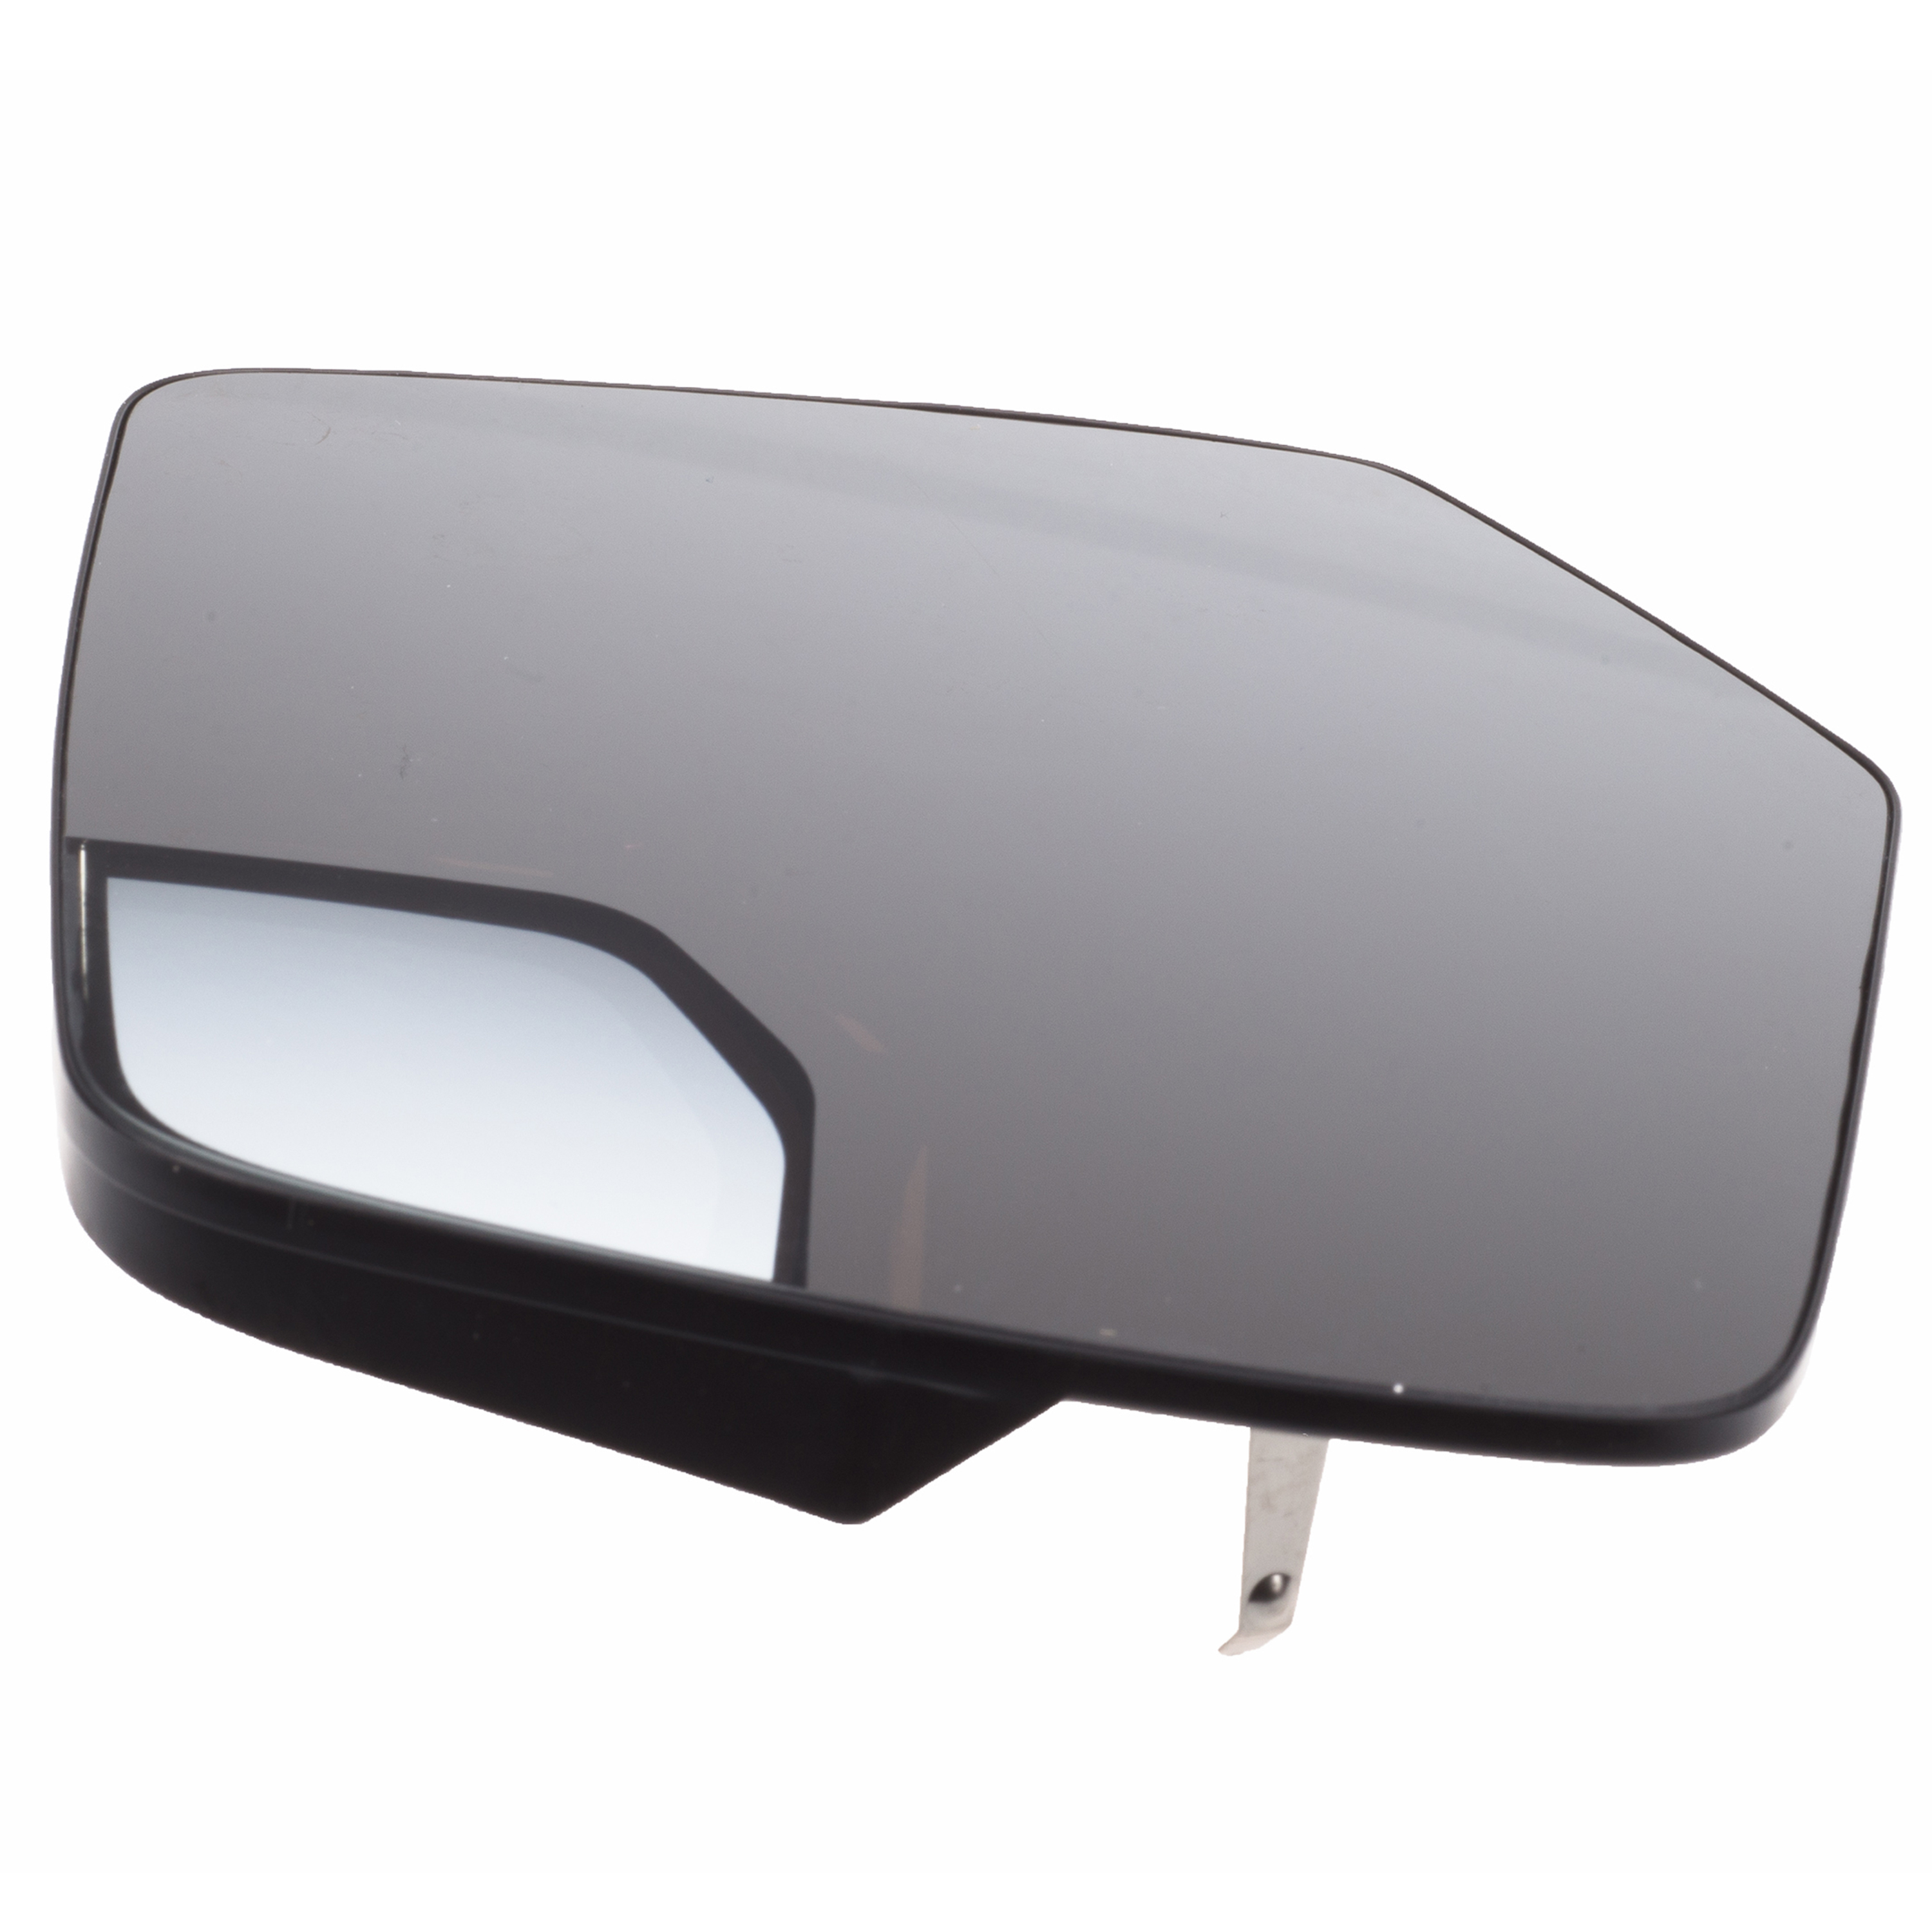 2010-2012 Ford Escape Mercury Mariner Left Driver Side View Mirror Glass OEM NEW | eBay 2011 Ford Escape Driver Side Mirror Replacement